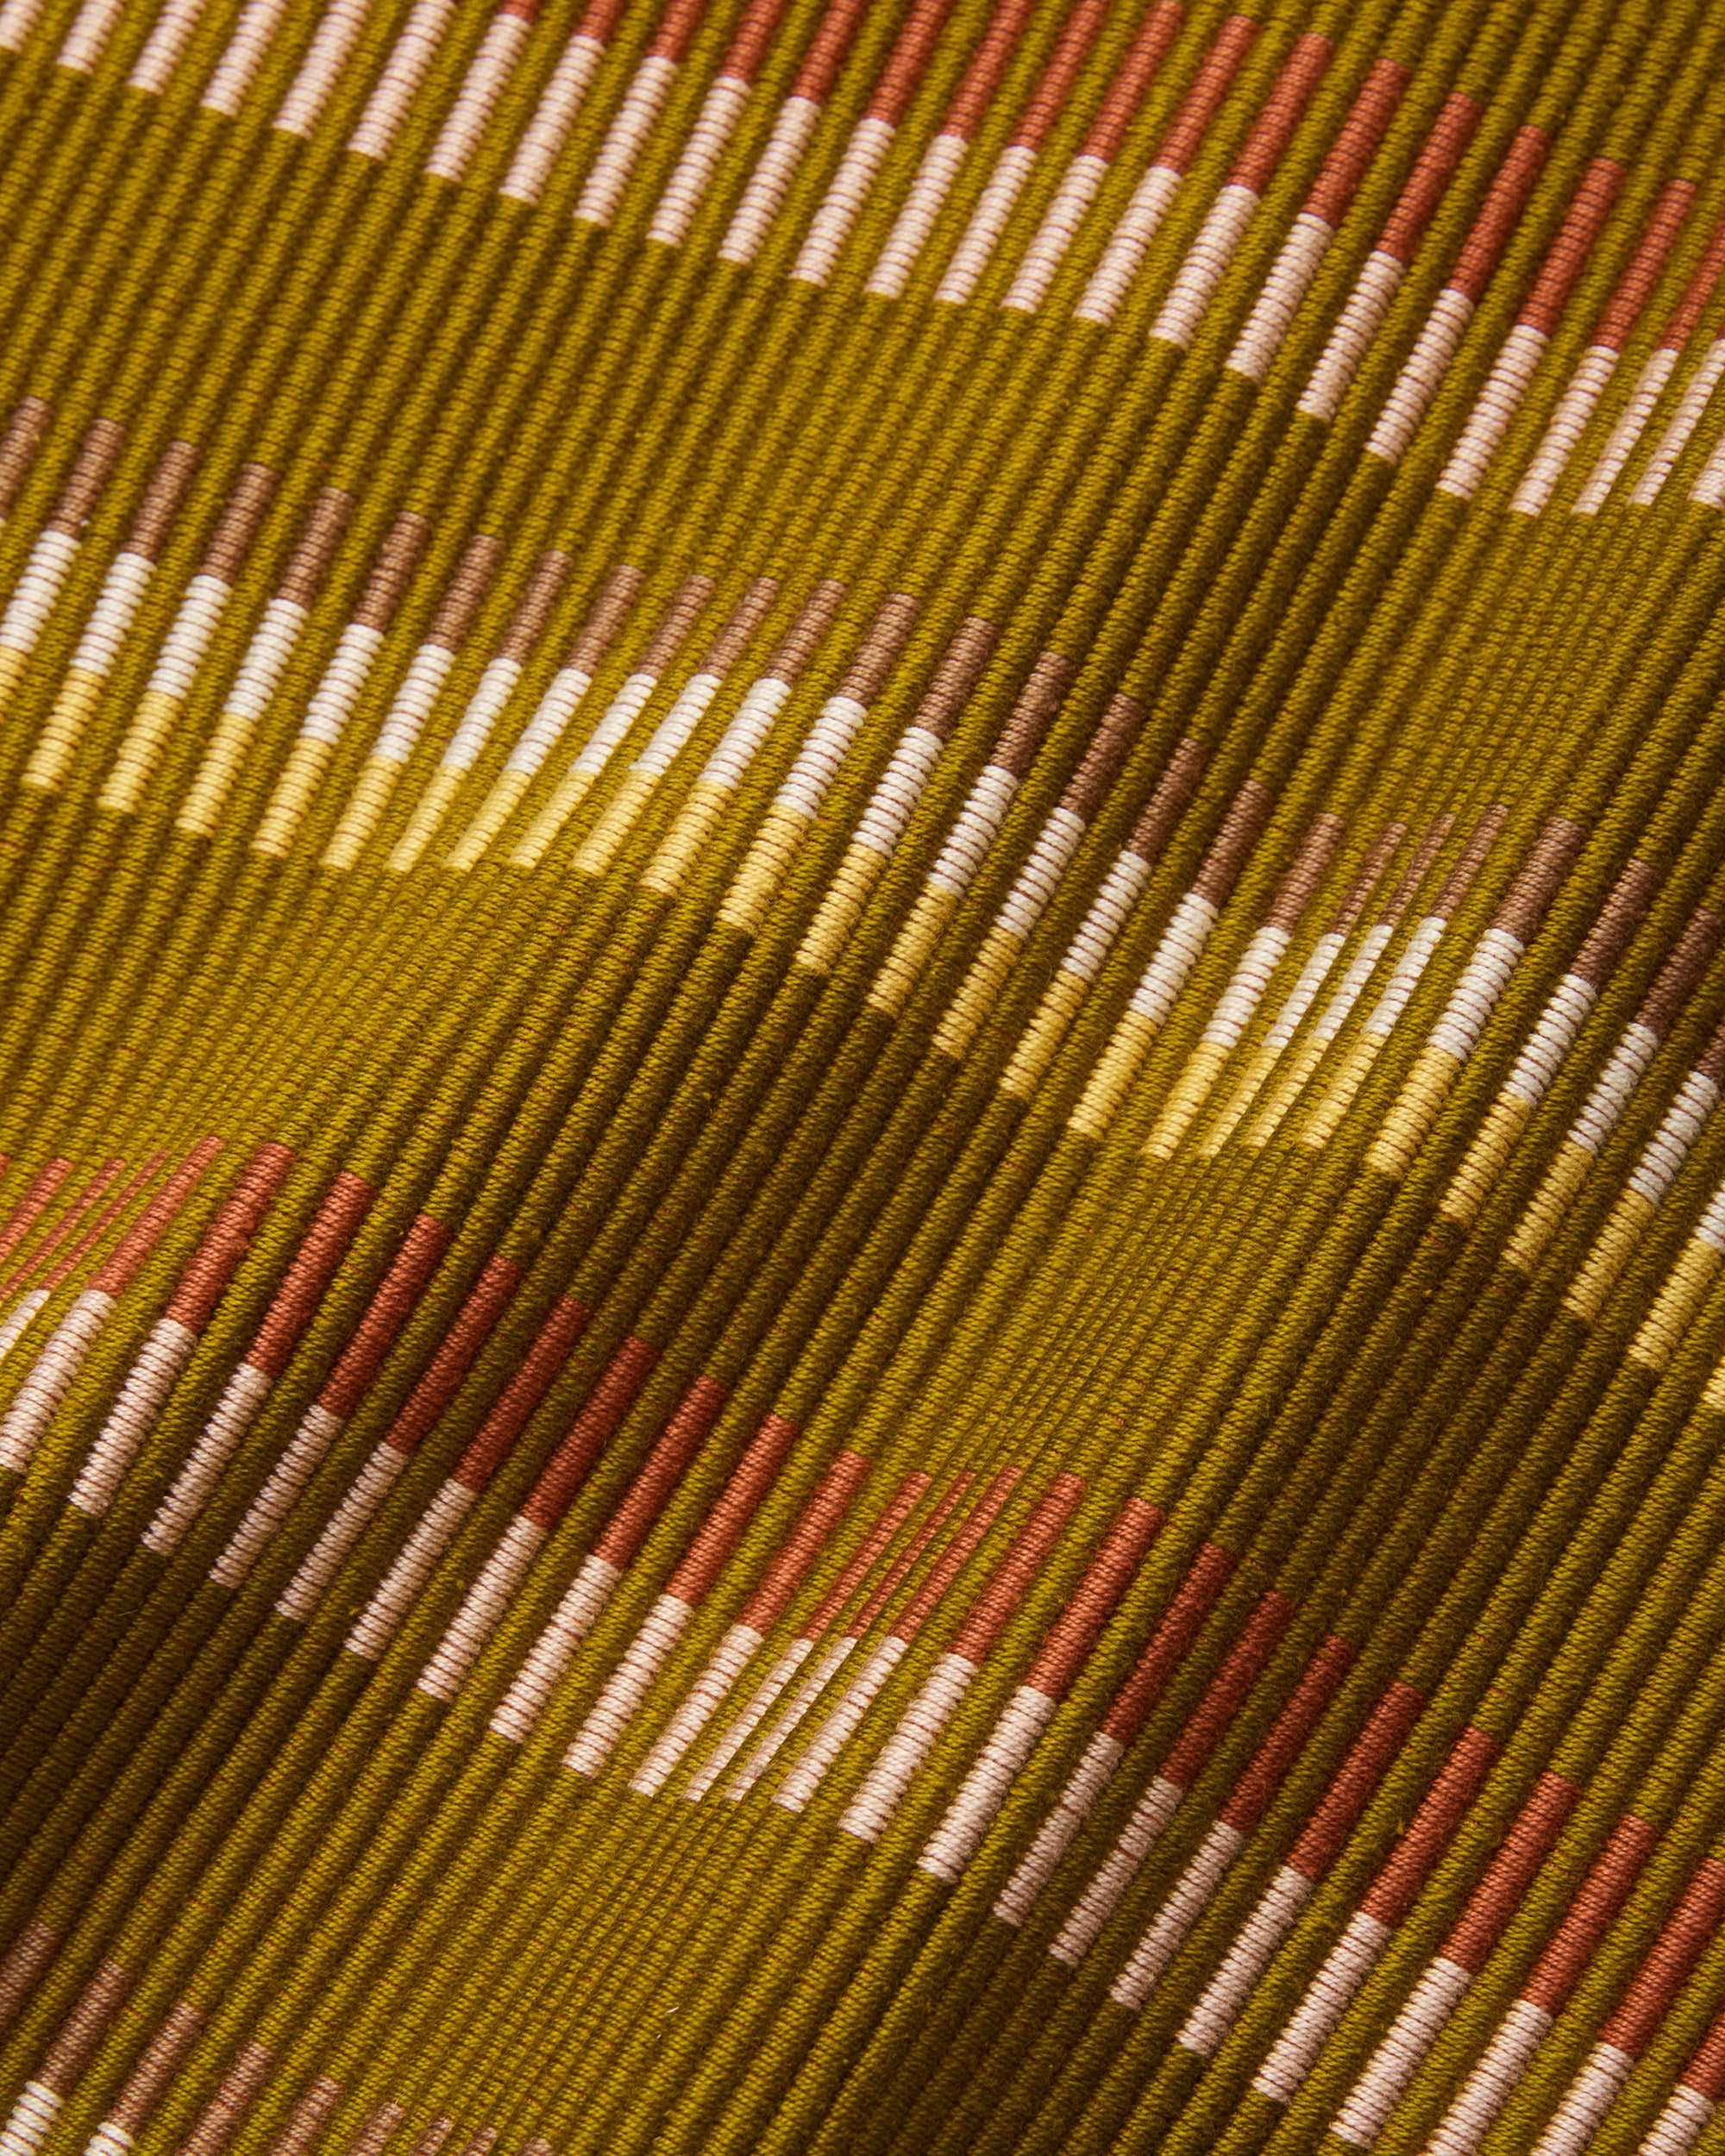 Handwoven close-up texture of MINNA's Ridges Placemat in Starling, ethically handwoven olive green, rust, yellow